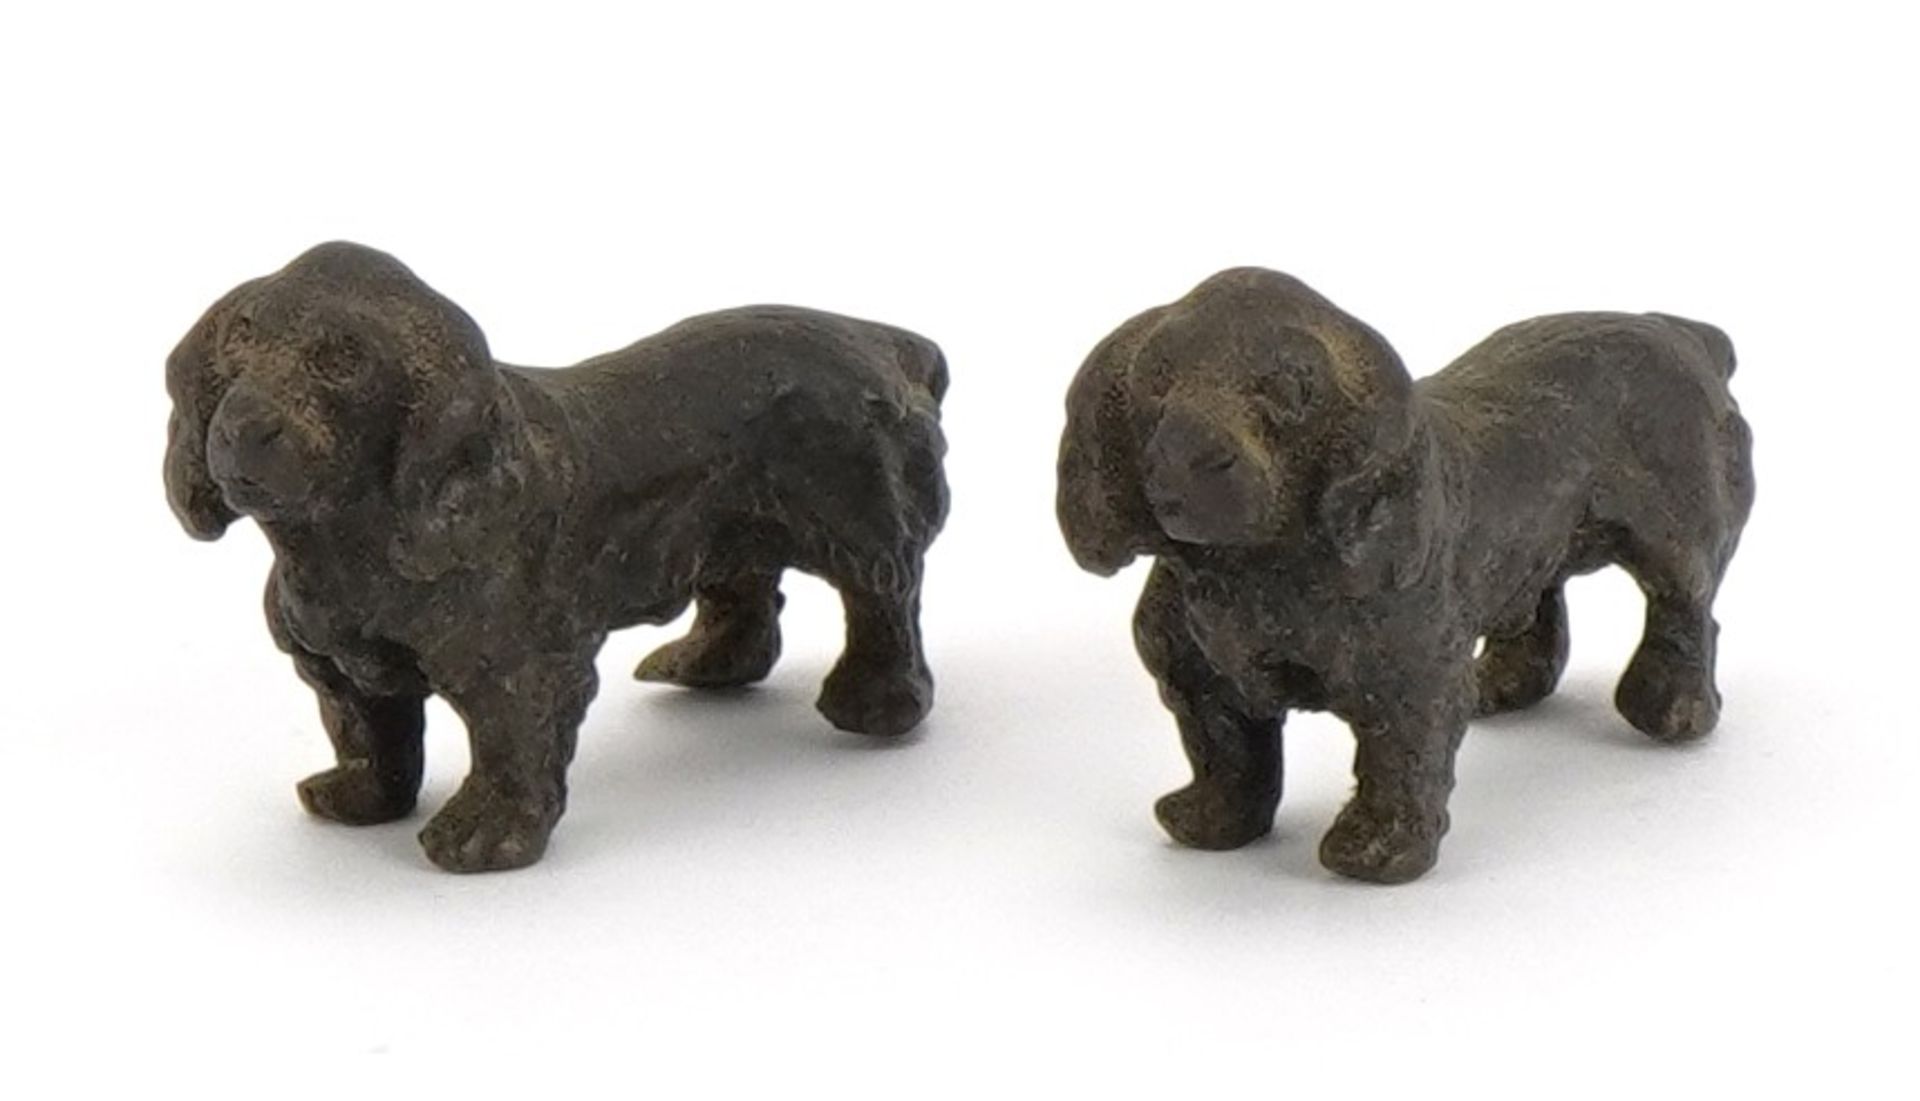 Pair of miniature patinated bronze Spaniels, each 3.5cm in length : For further information on